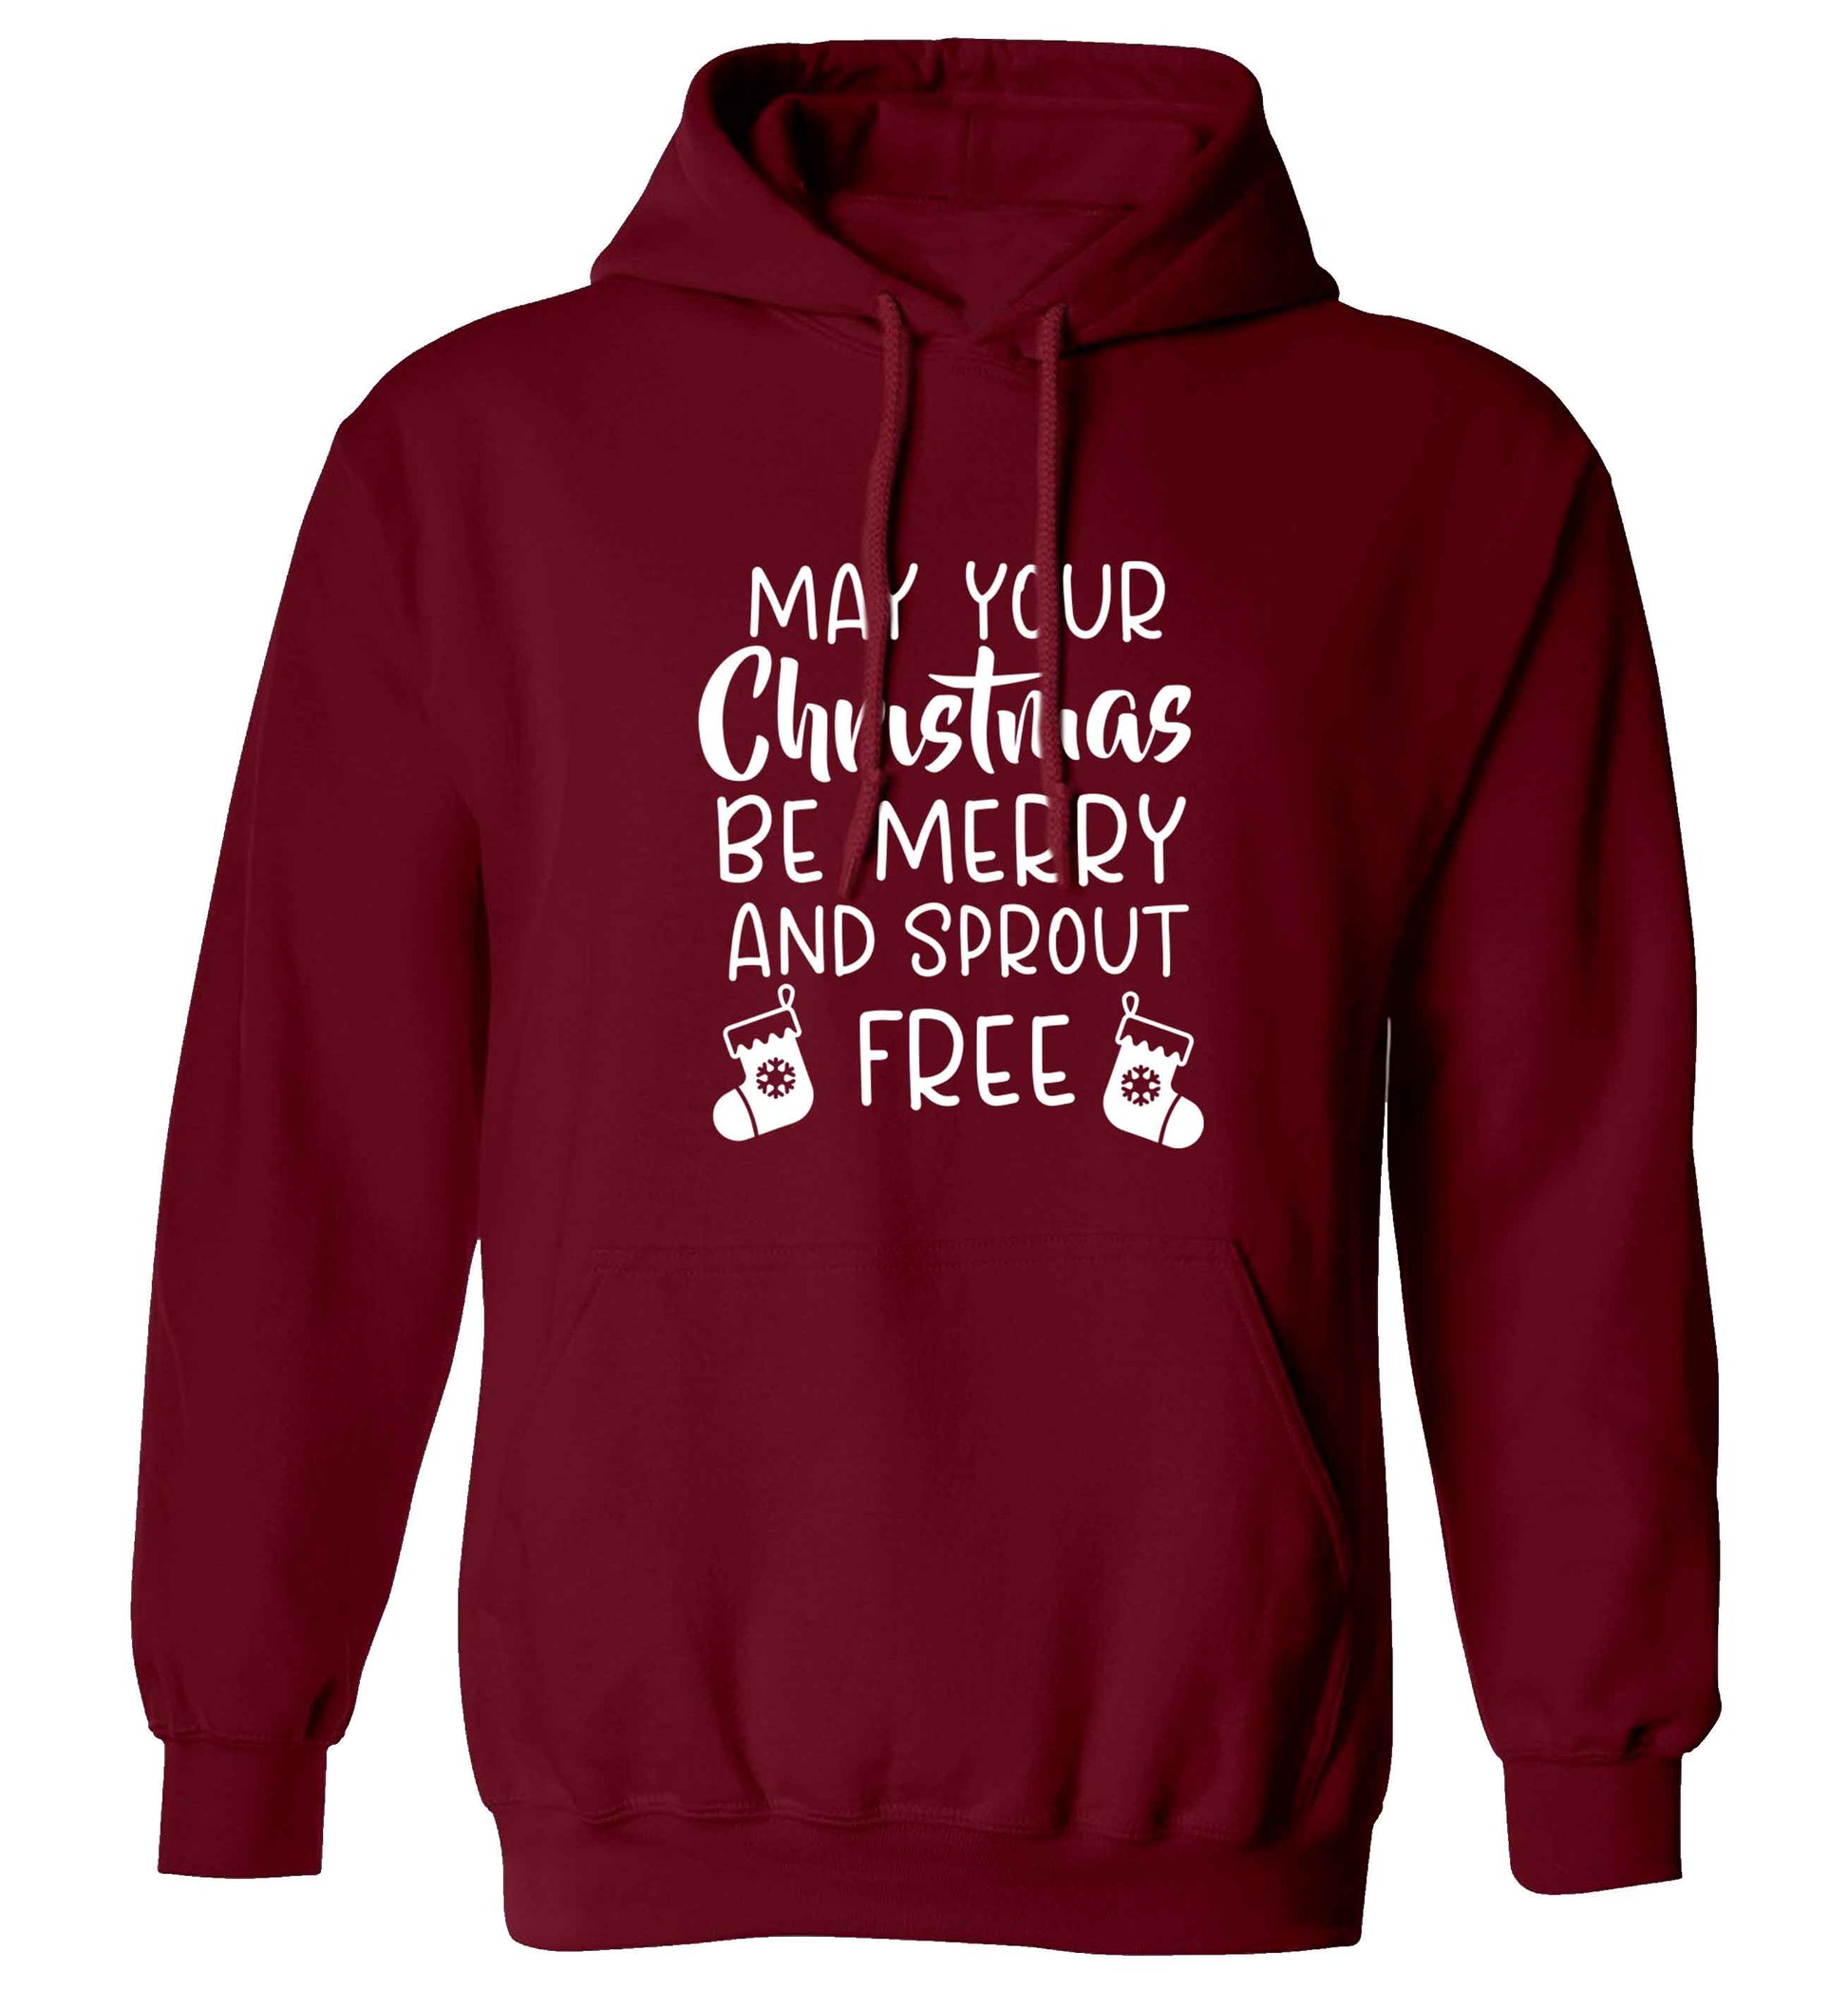 May your Christmas be merry and sprout free adults unisex maroon hoodie 2XL